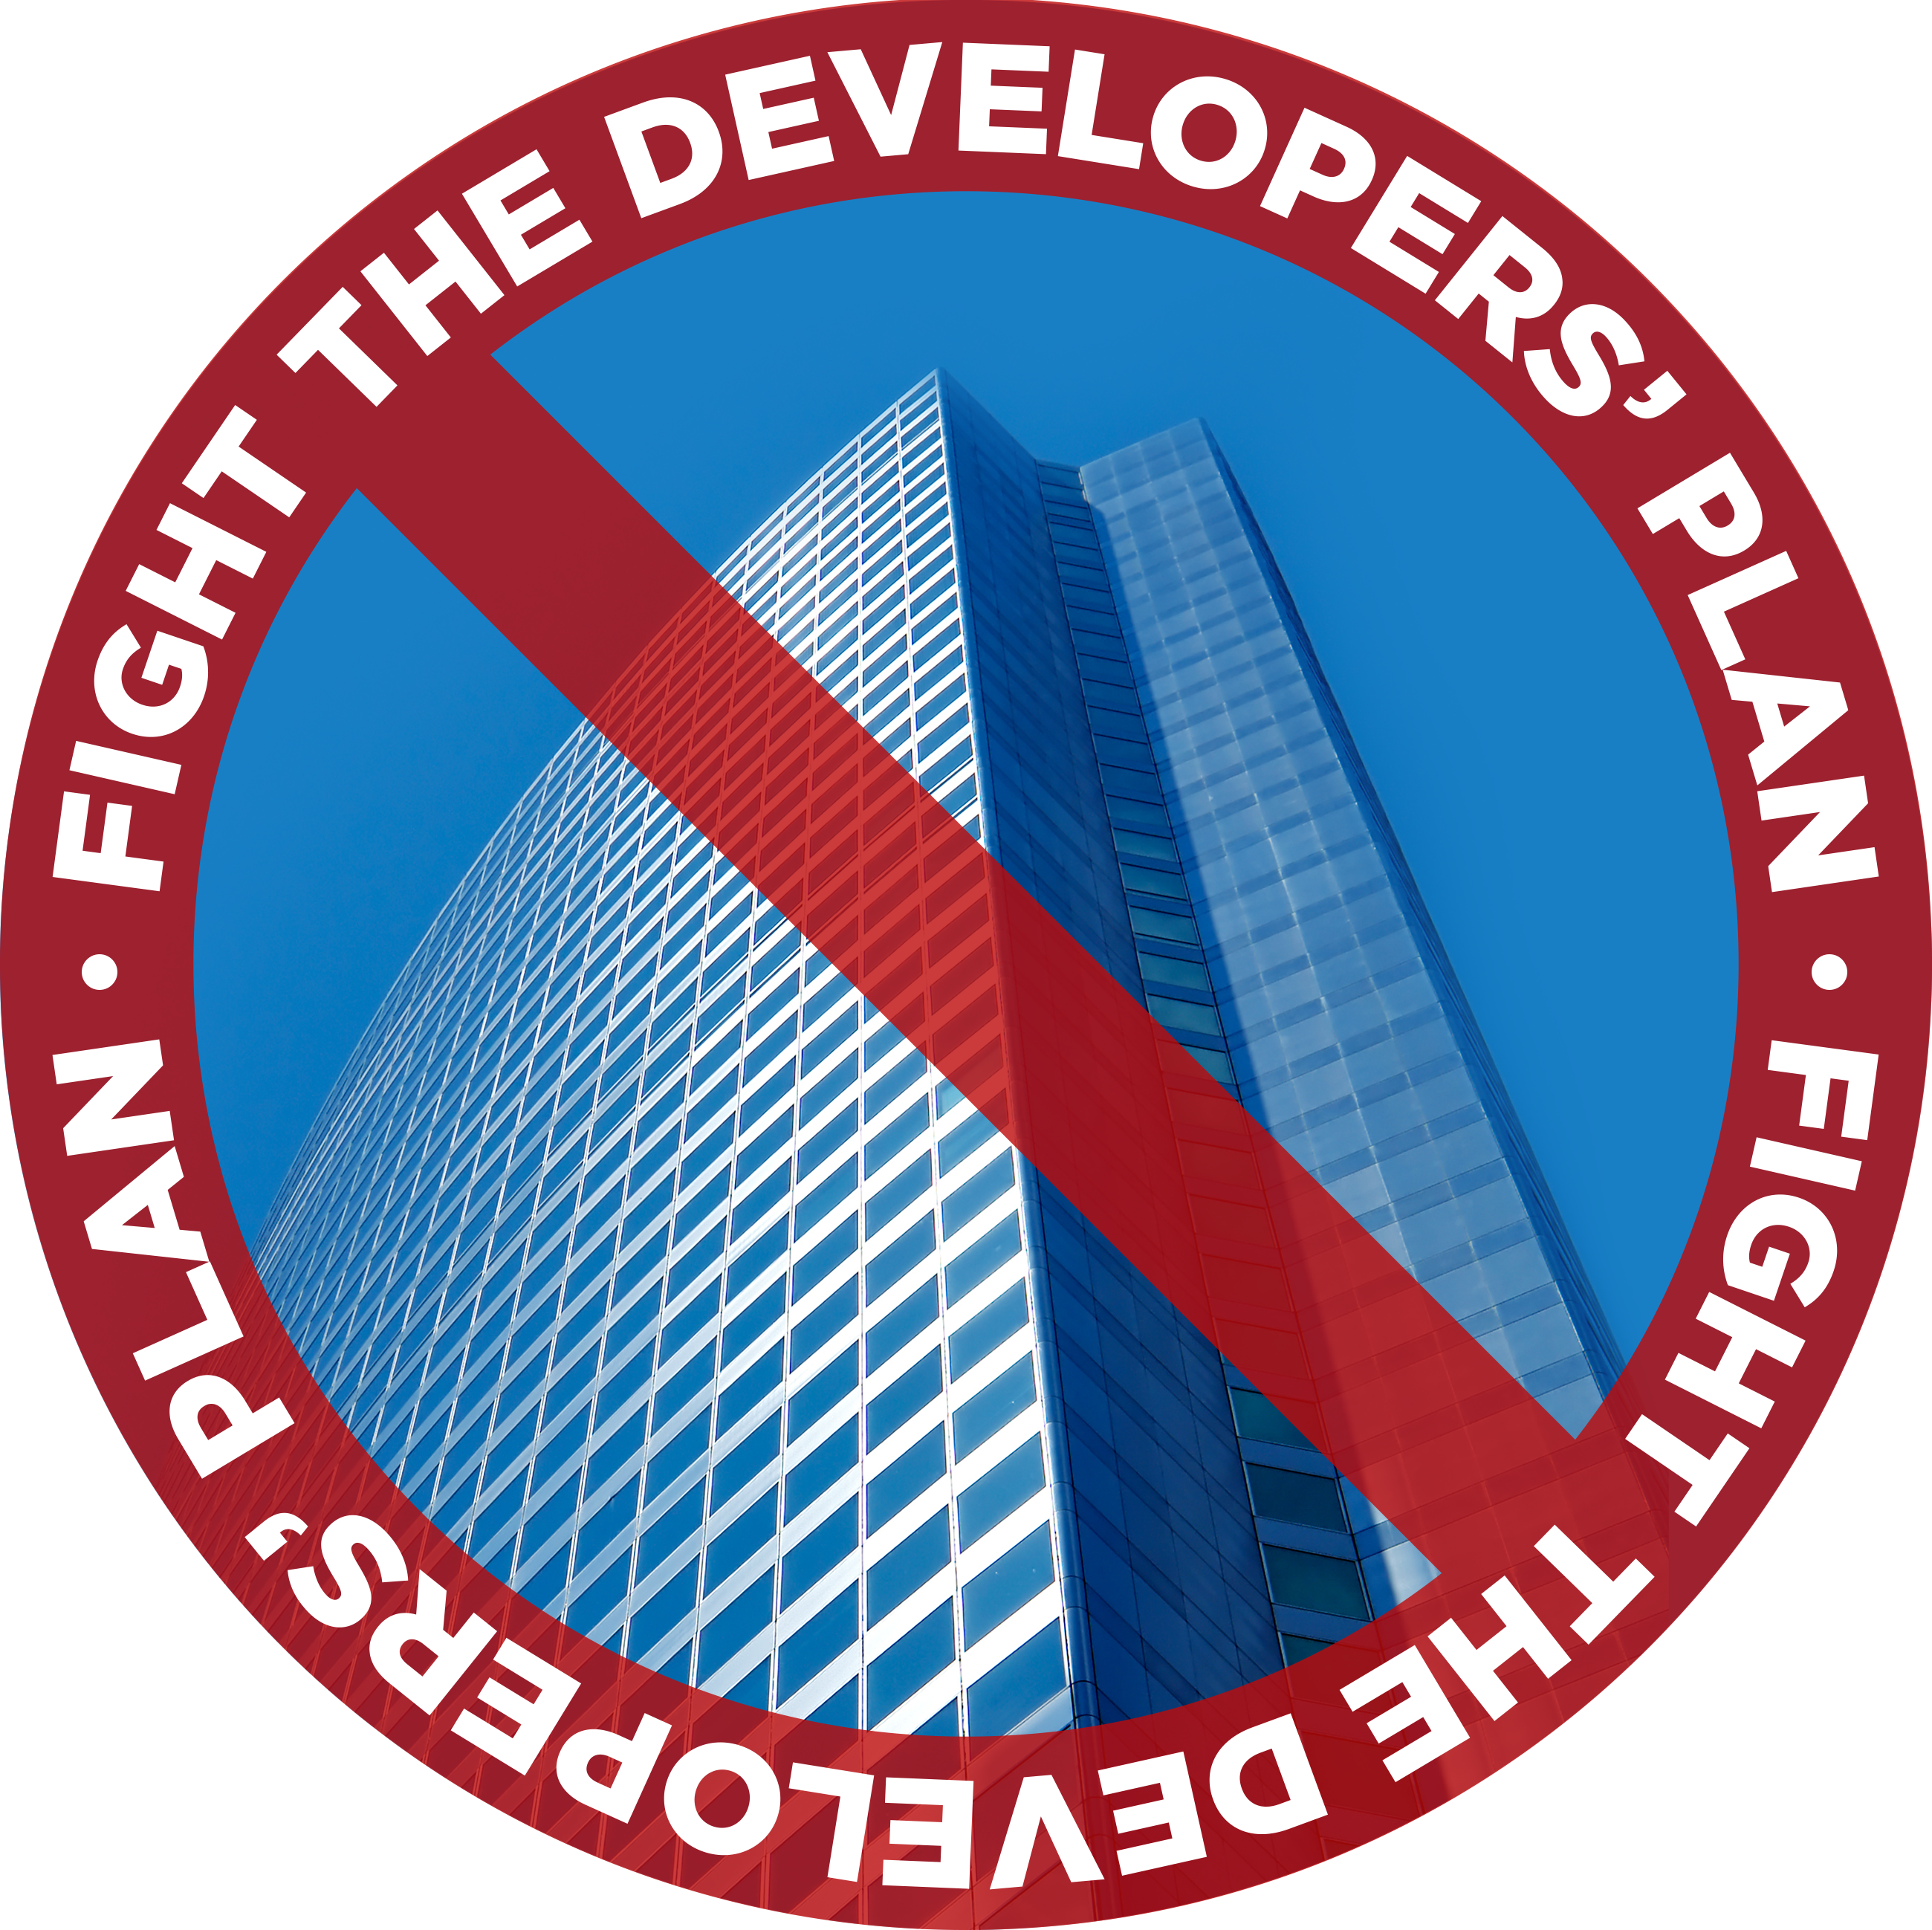 Fight the Developers’ Plan